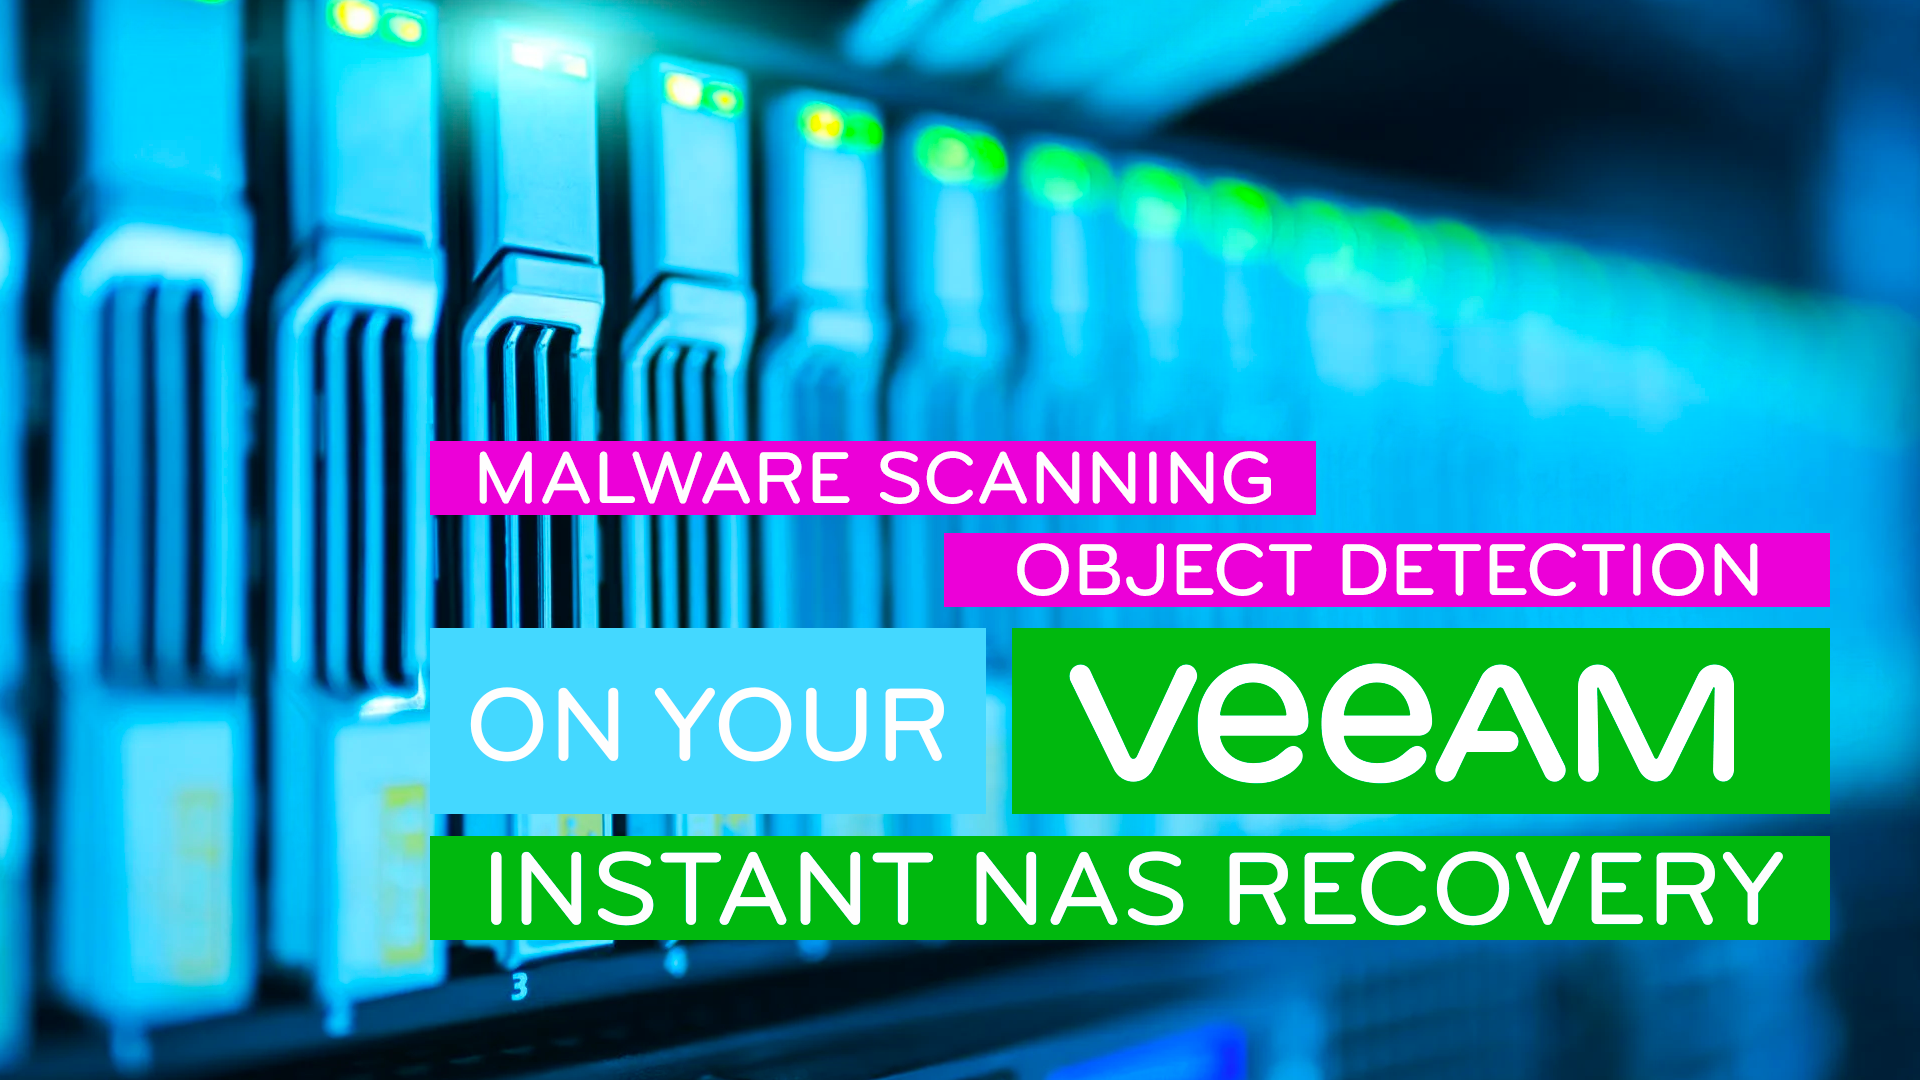 Veeam Instant NAS Recovery in v11, Malware Detection and Machine Learning